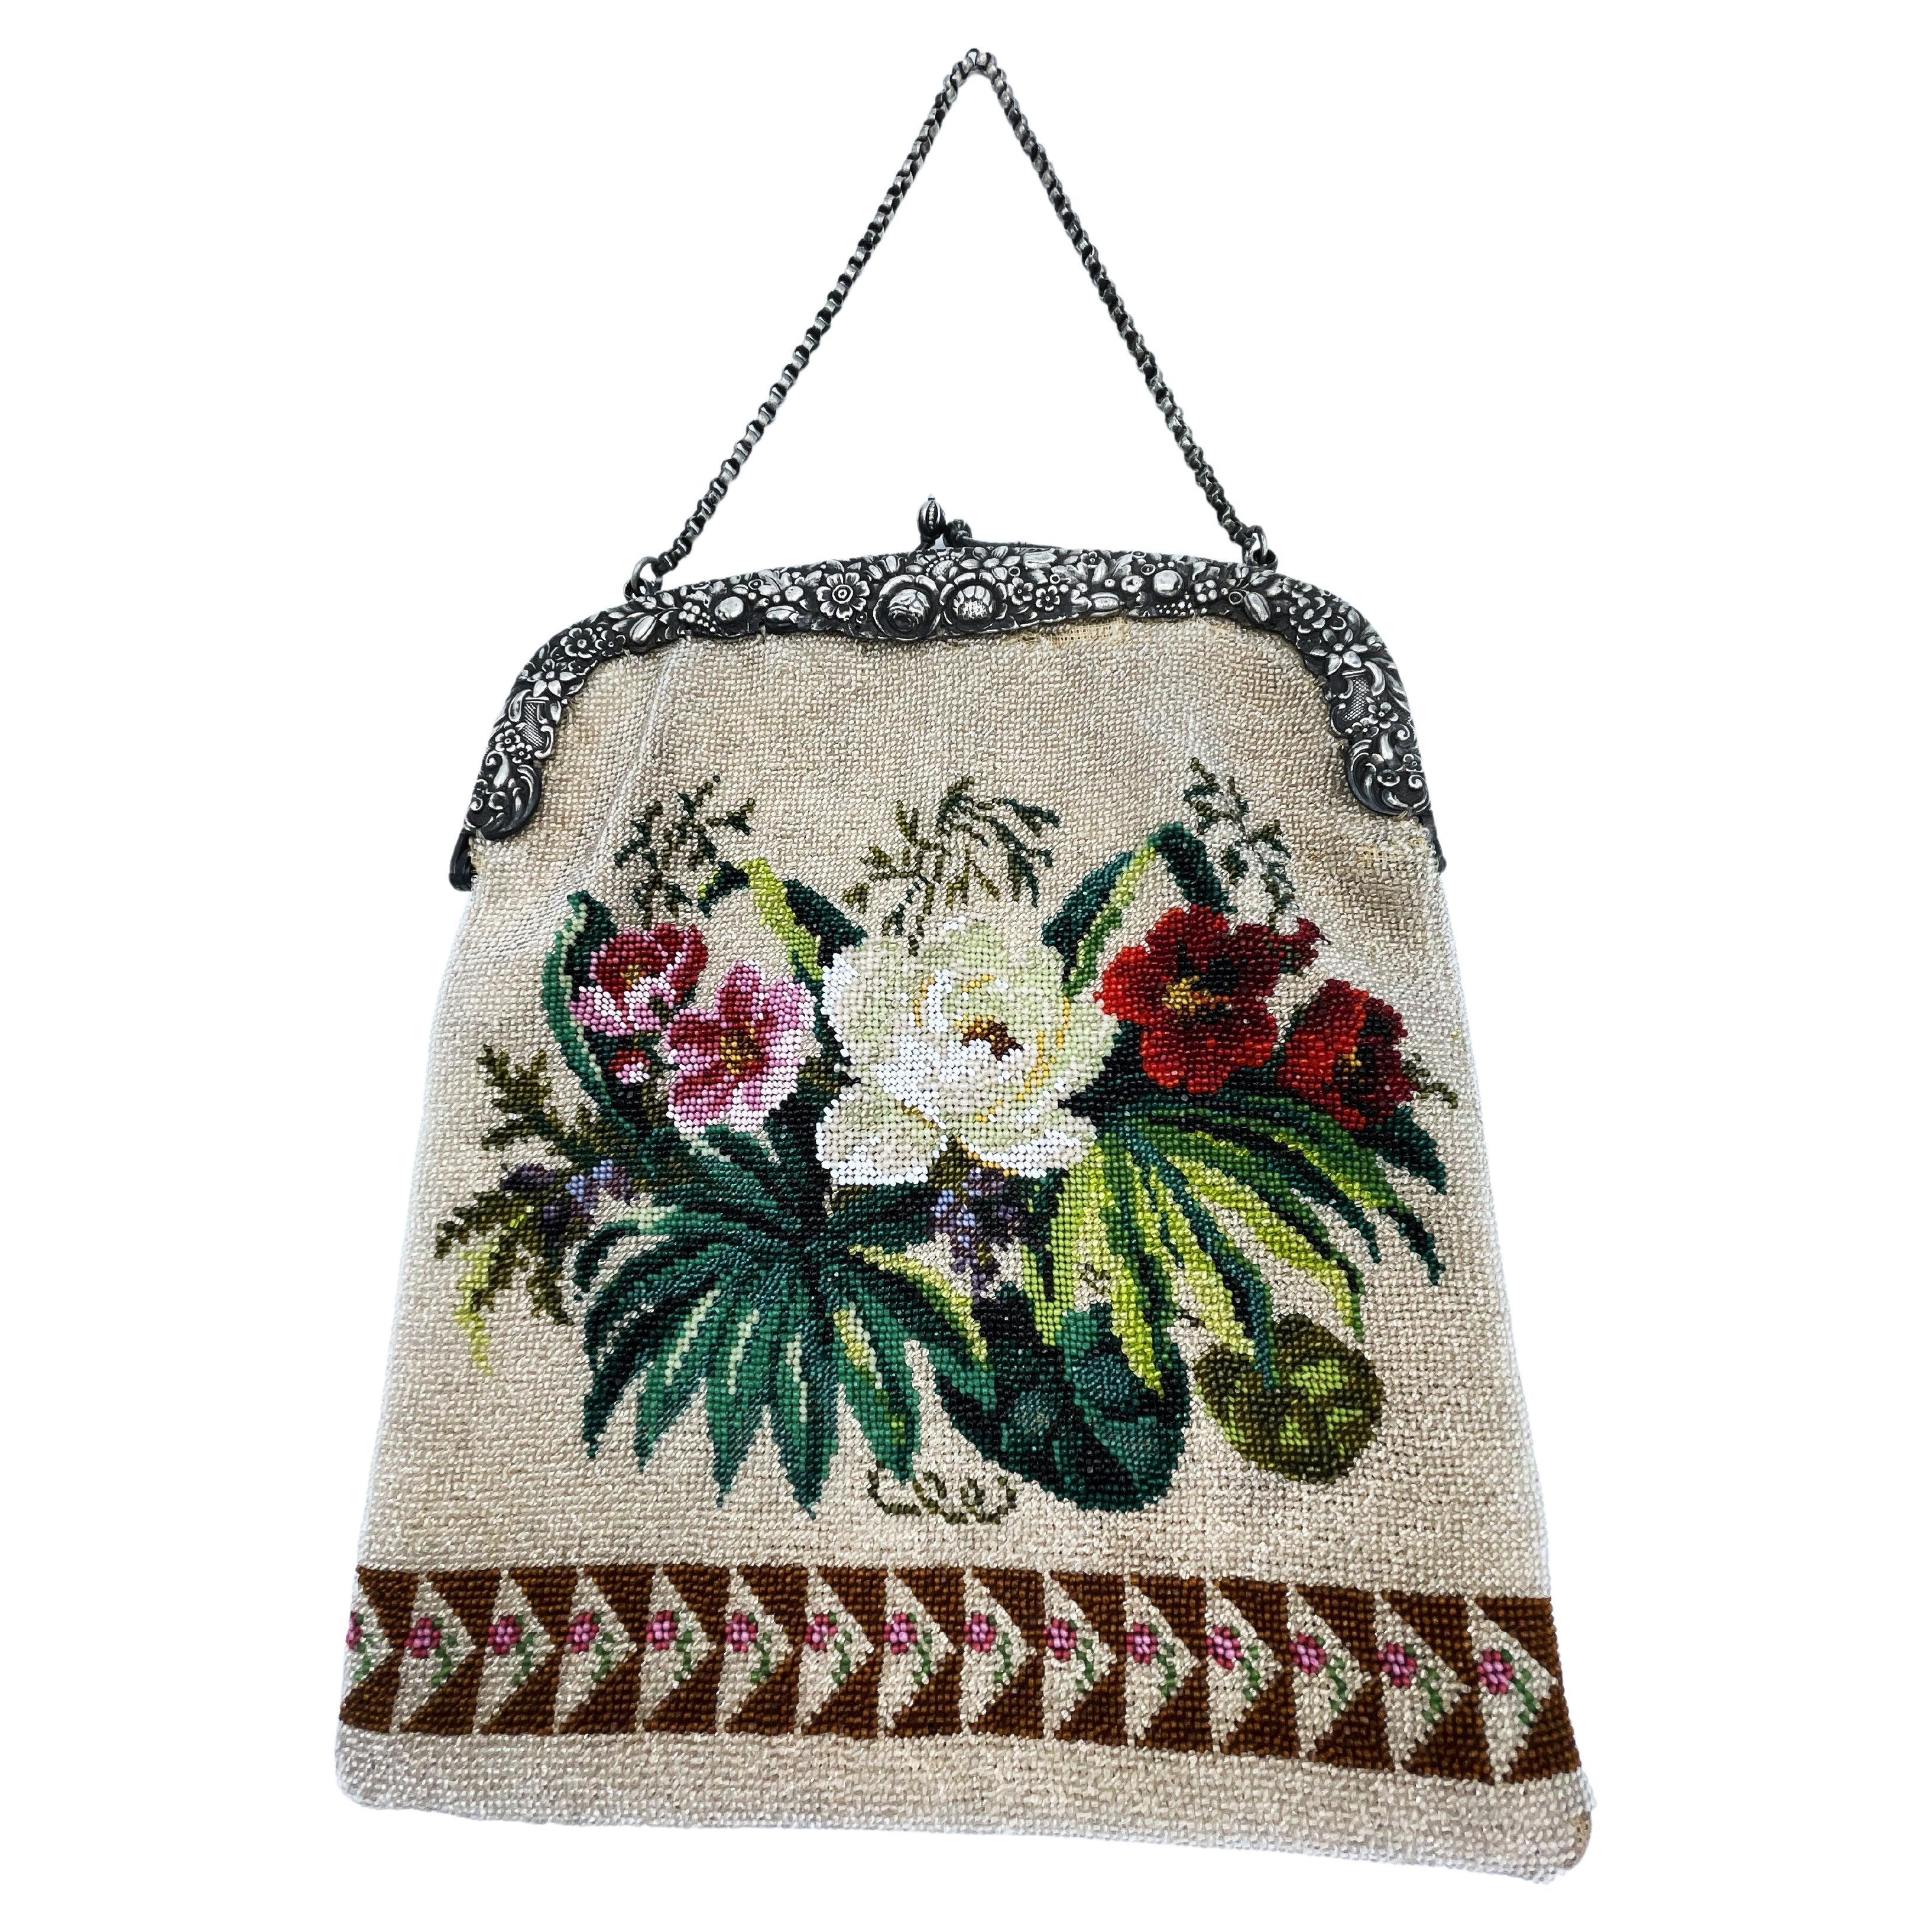 
The beaded bag has a silver handle in the shape of a double arch, which is designed with an adjuster made of stylized flower and leaf tendrils and has a pressure closure. A 38 cm long pea chain is attached to 2 eyelets on the side.
The flat, tall